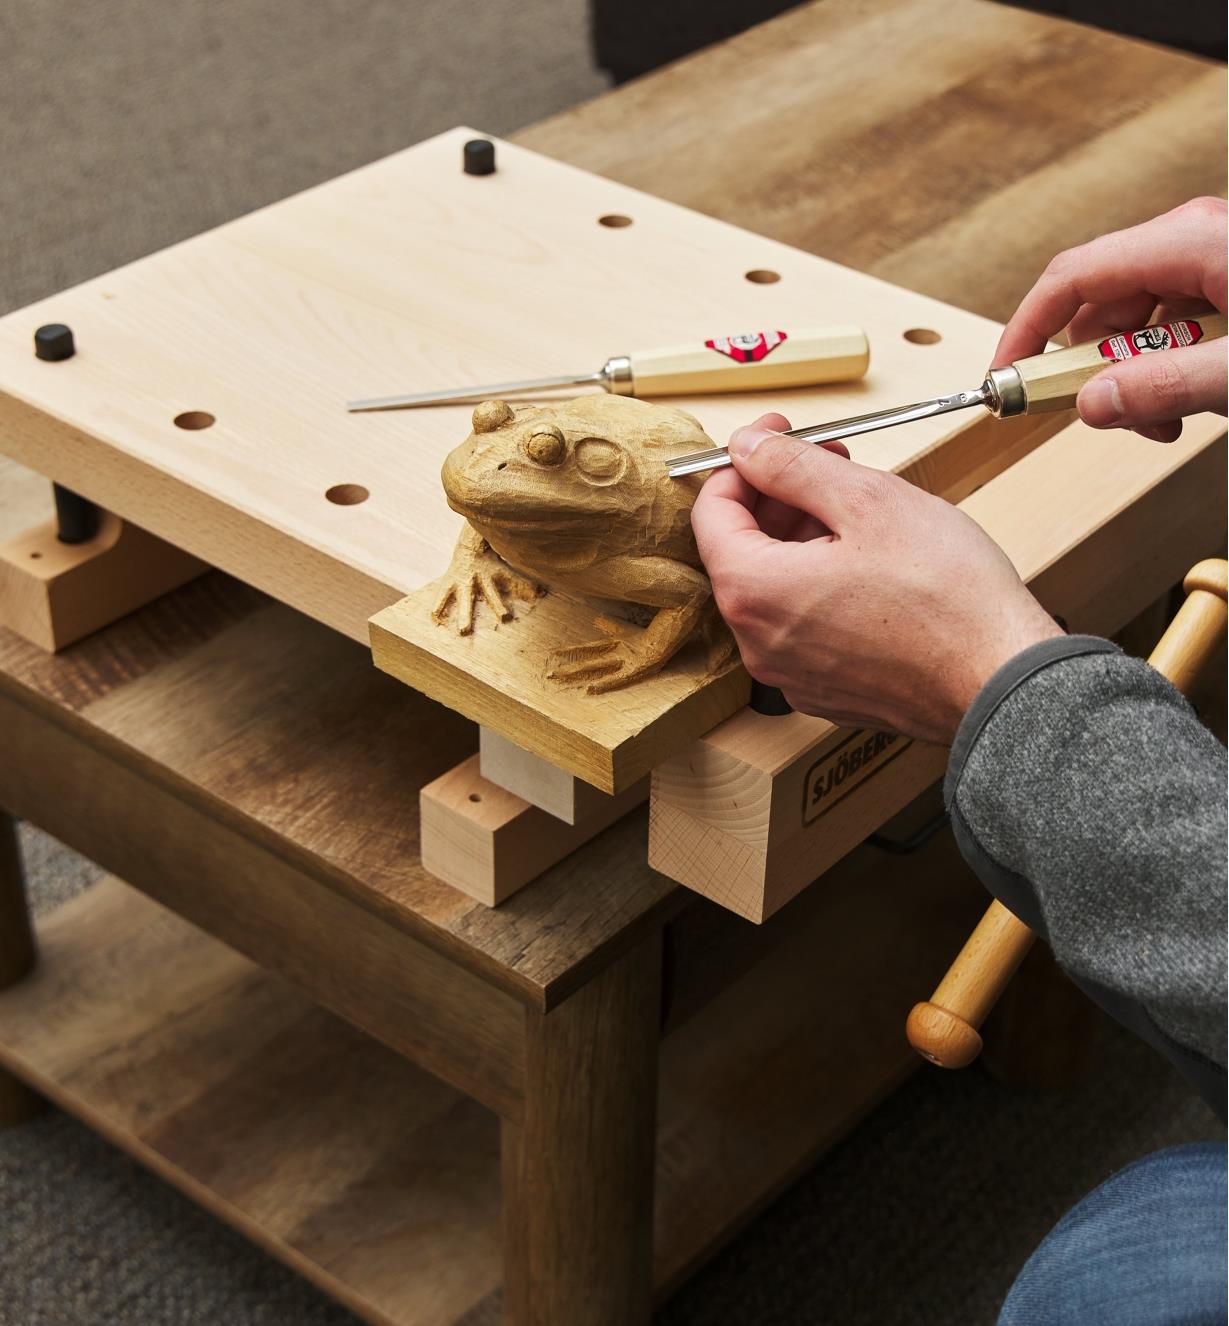 A frog being carved while secured to the workstation using the vise and bench dogs